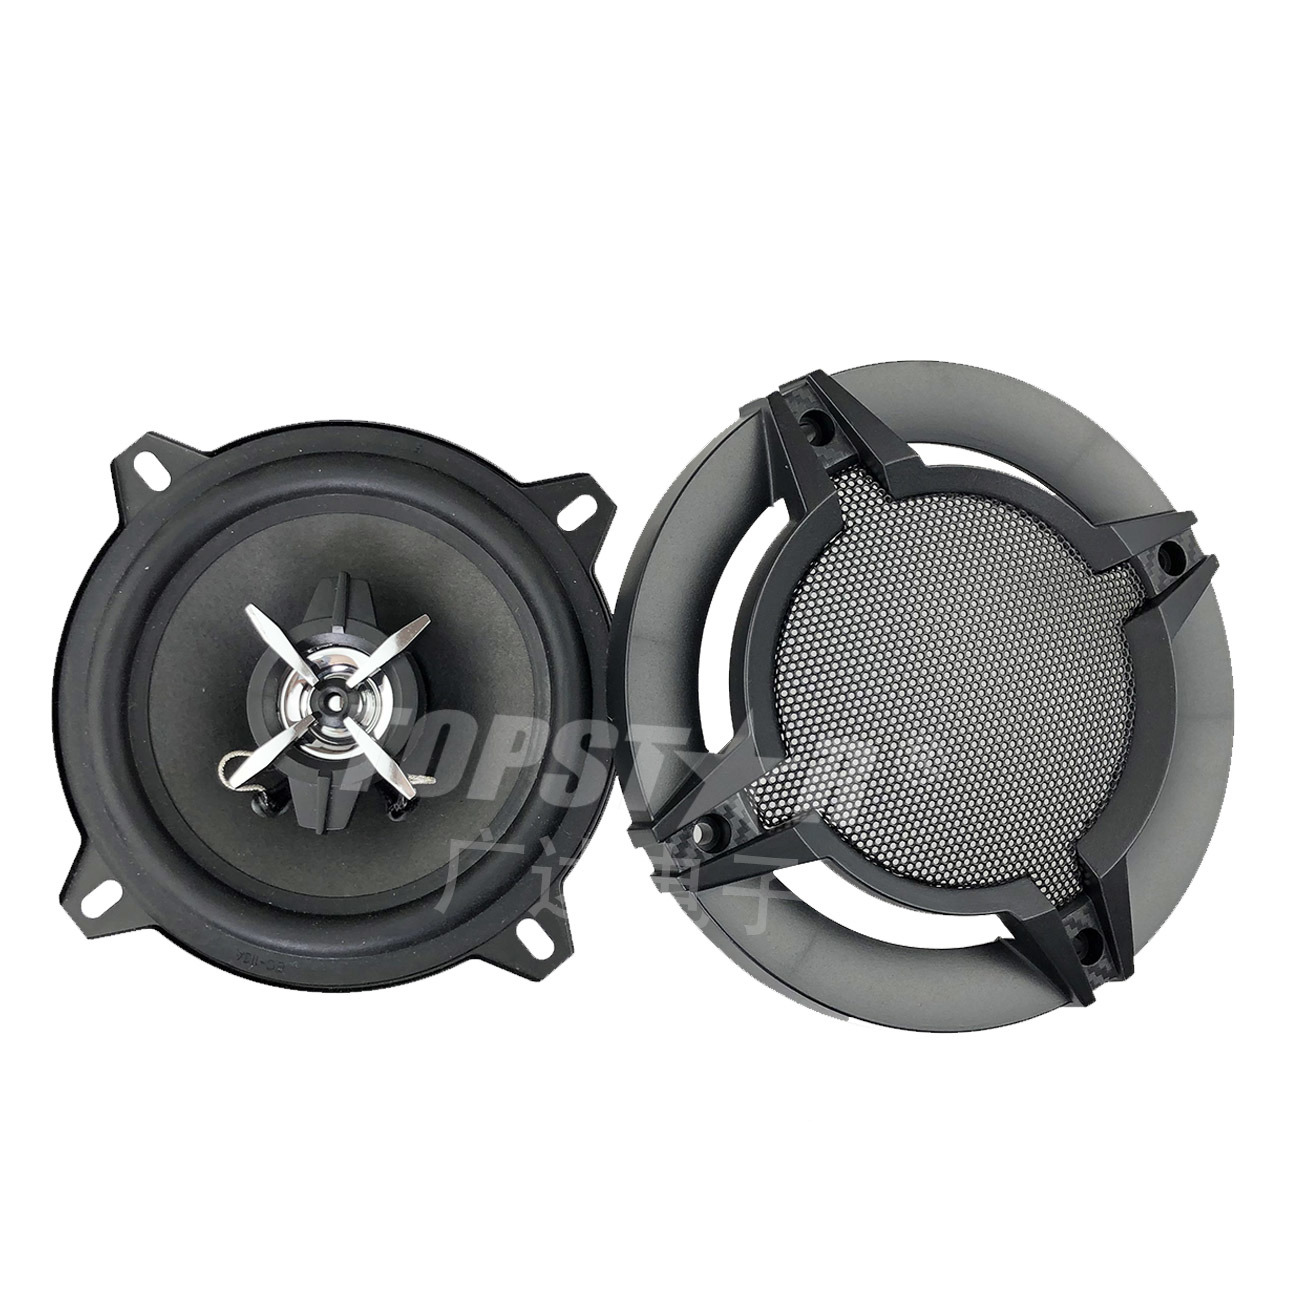 Coxial Car Sound Spakers 